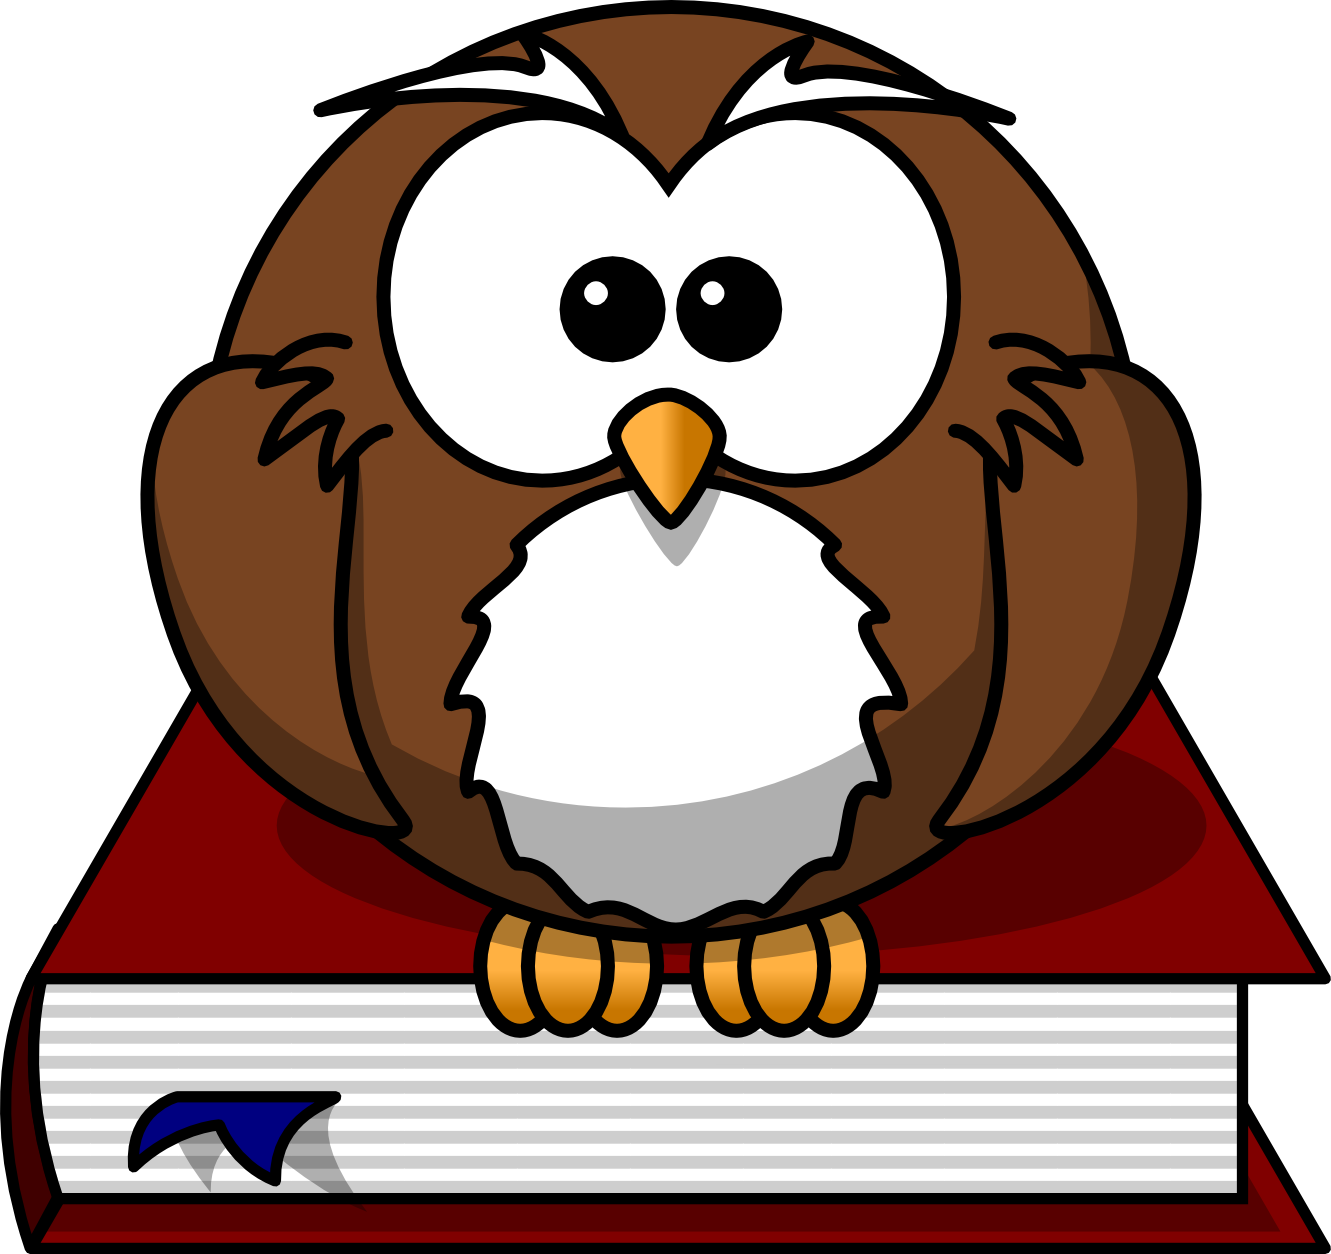 Cartoon Drawings Of Owls - ClipArt Best